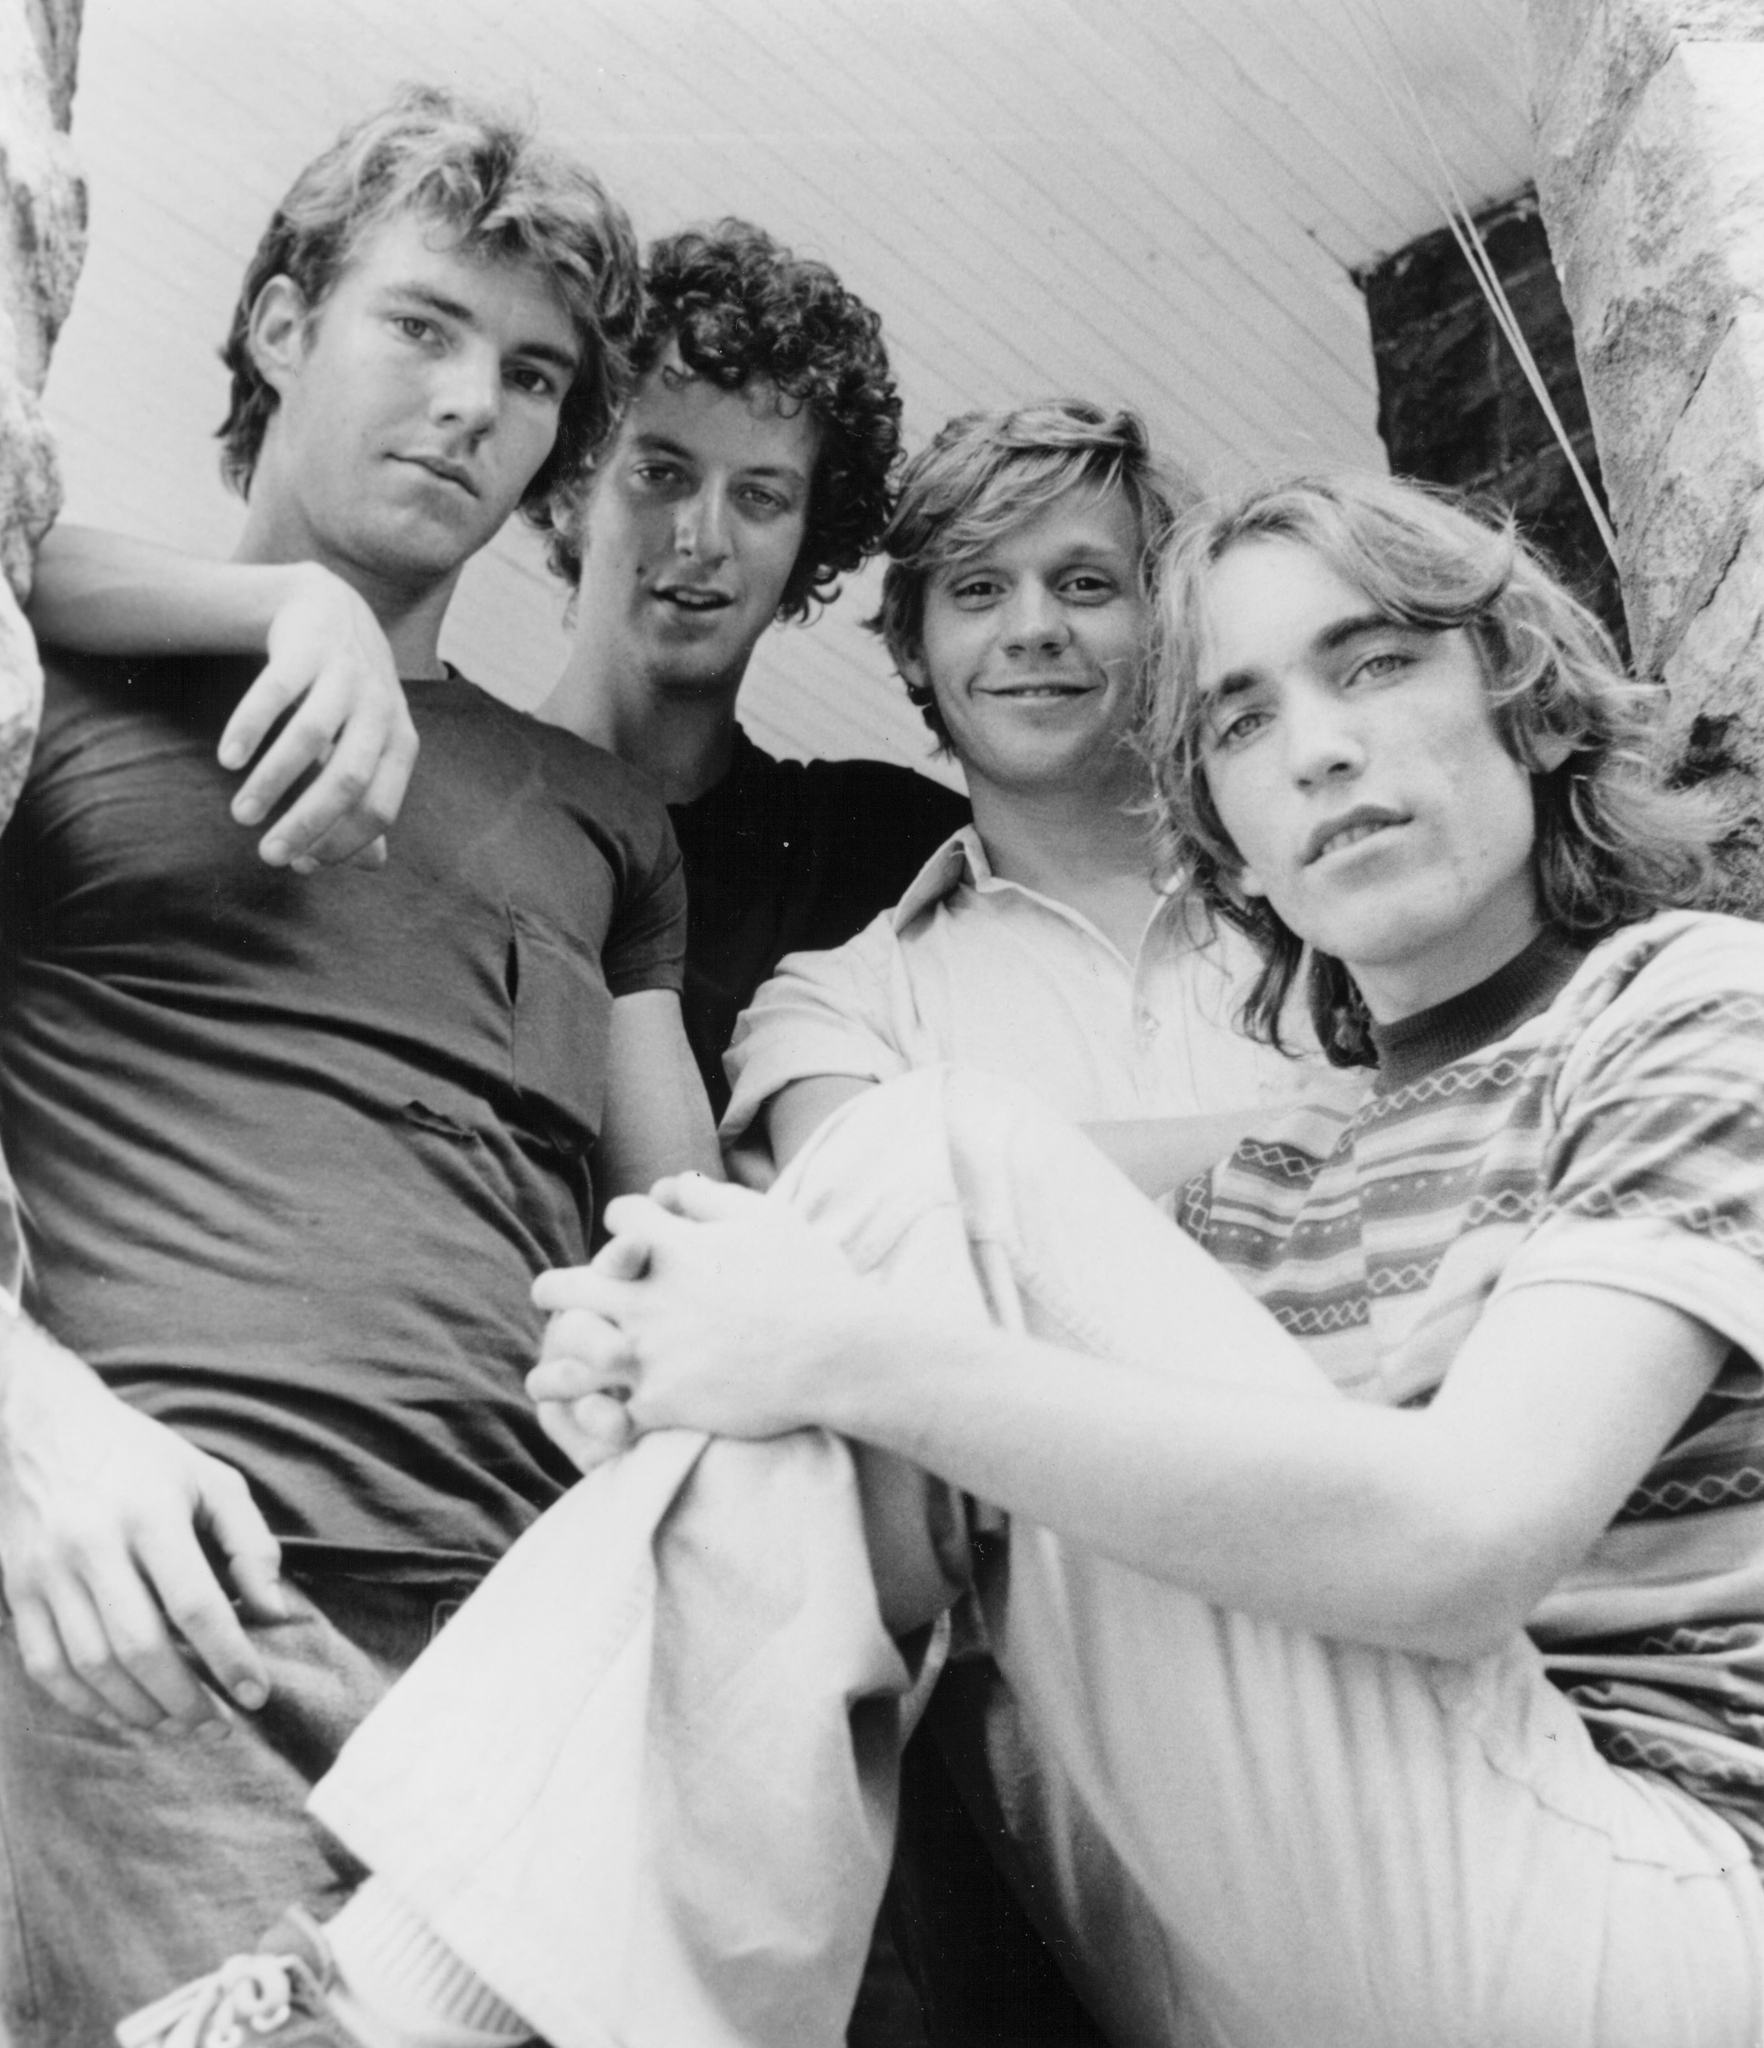 Still of Dennis Quaid, Dennis Christopher, Jackie Earle Haley and Daniel Stern in Breaking Away (1979)